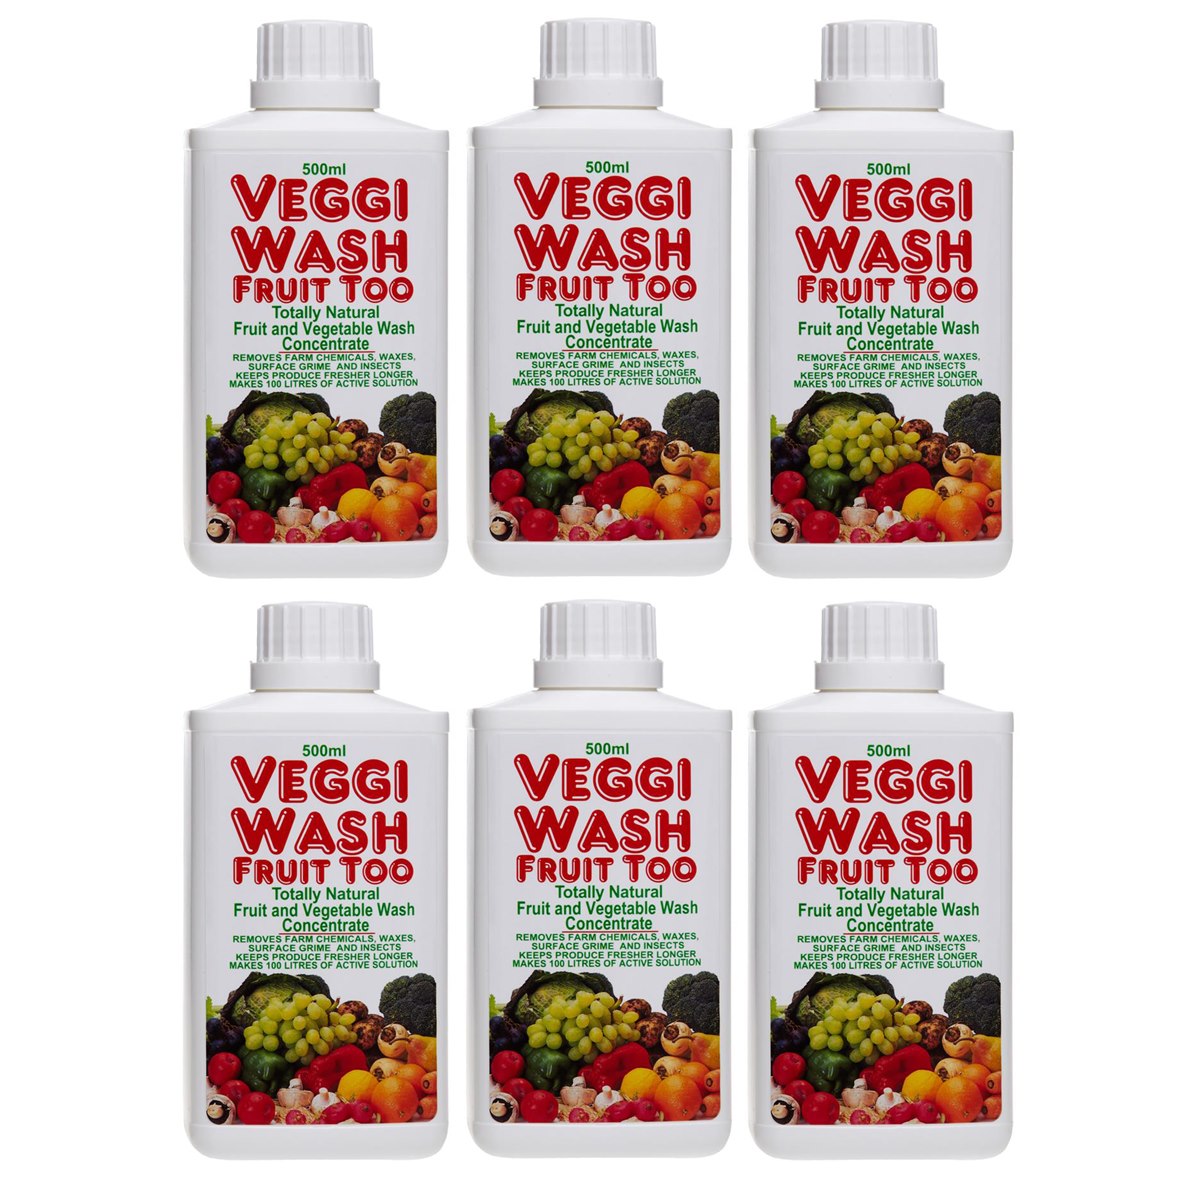 Case of 6 x Veggi Wash Fruit Too Concentrated 500ml